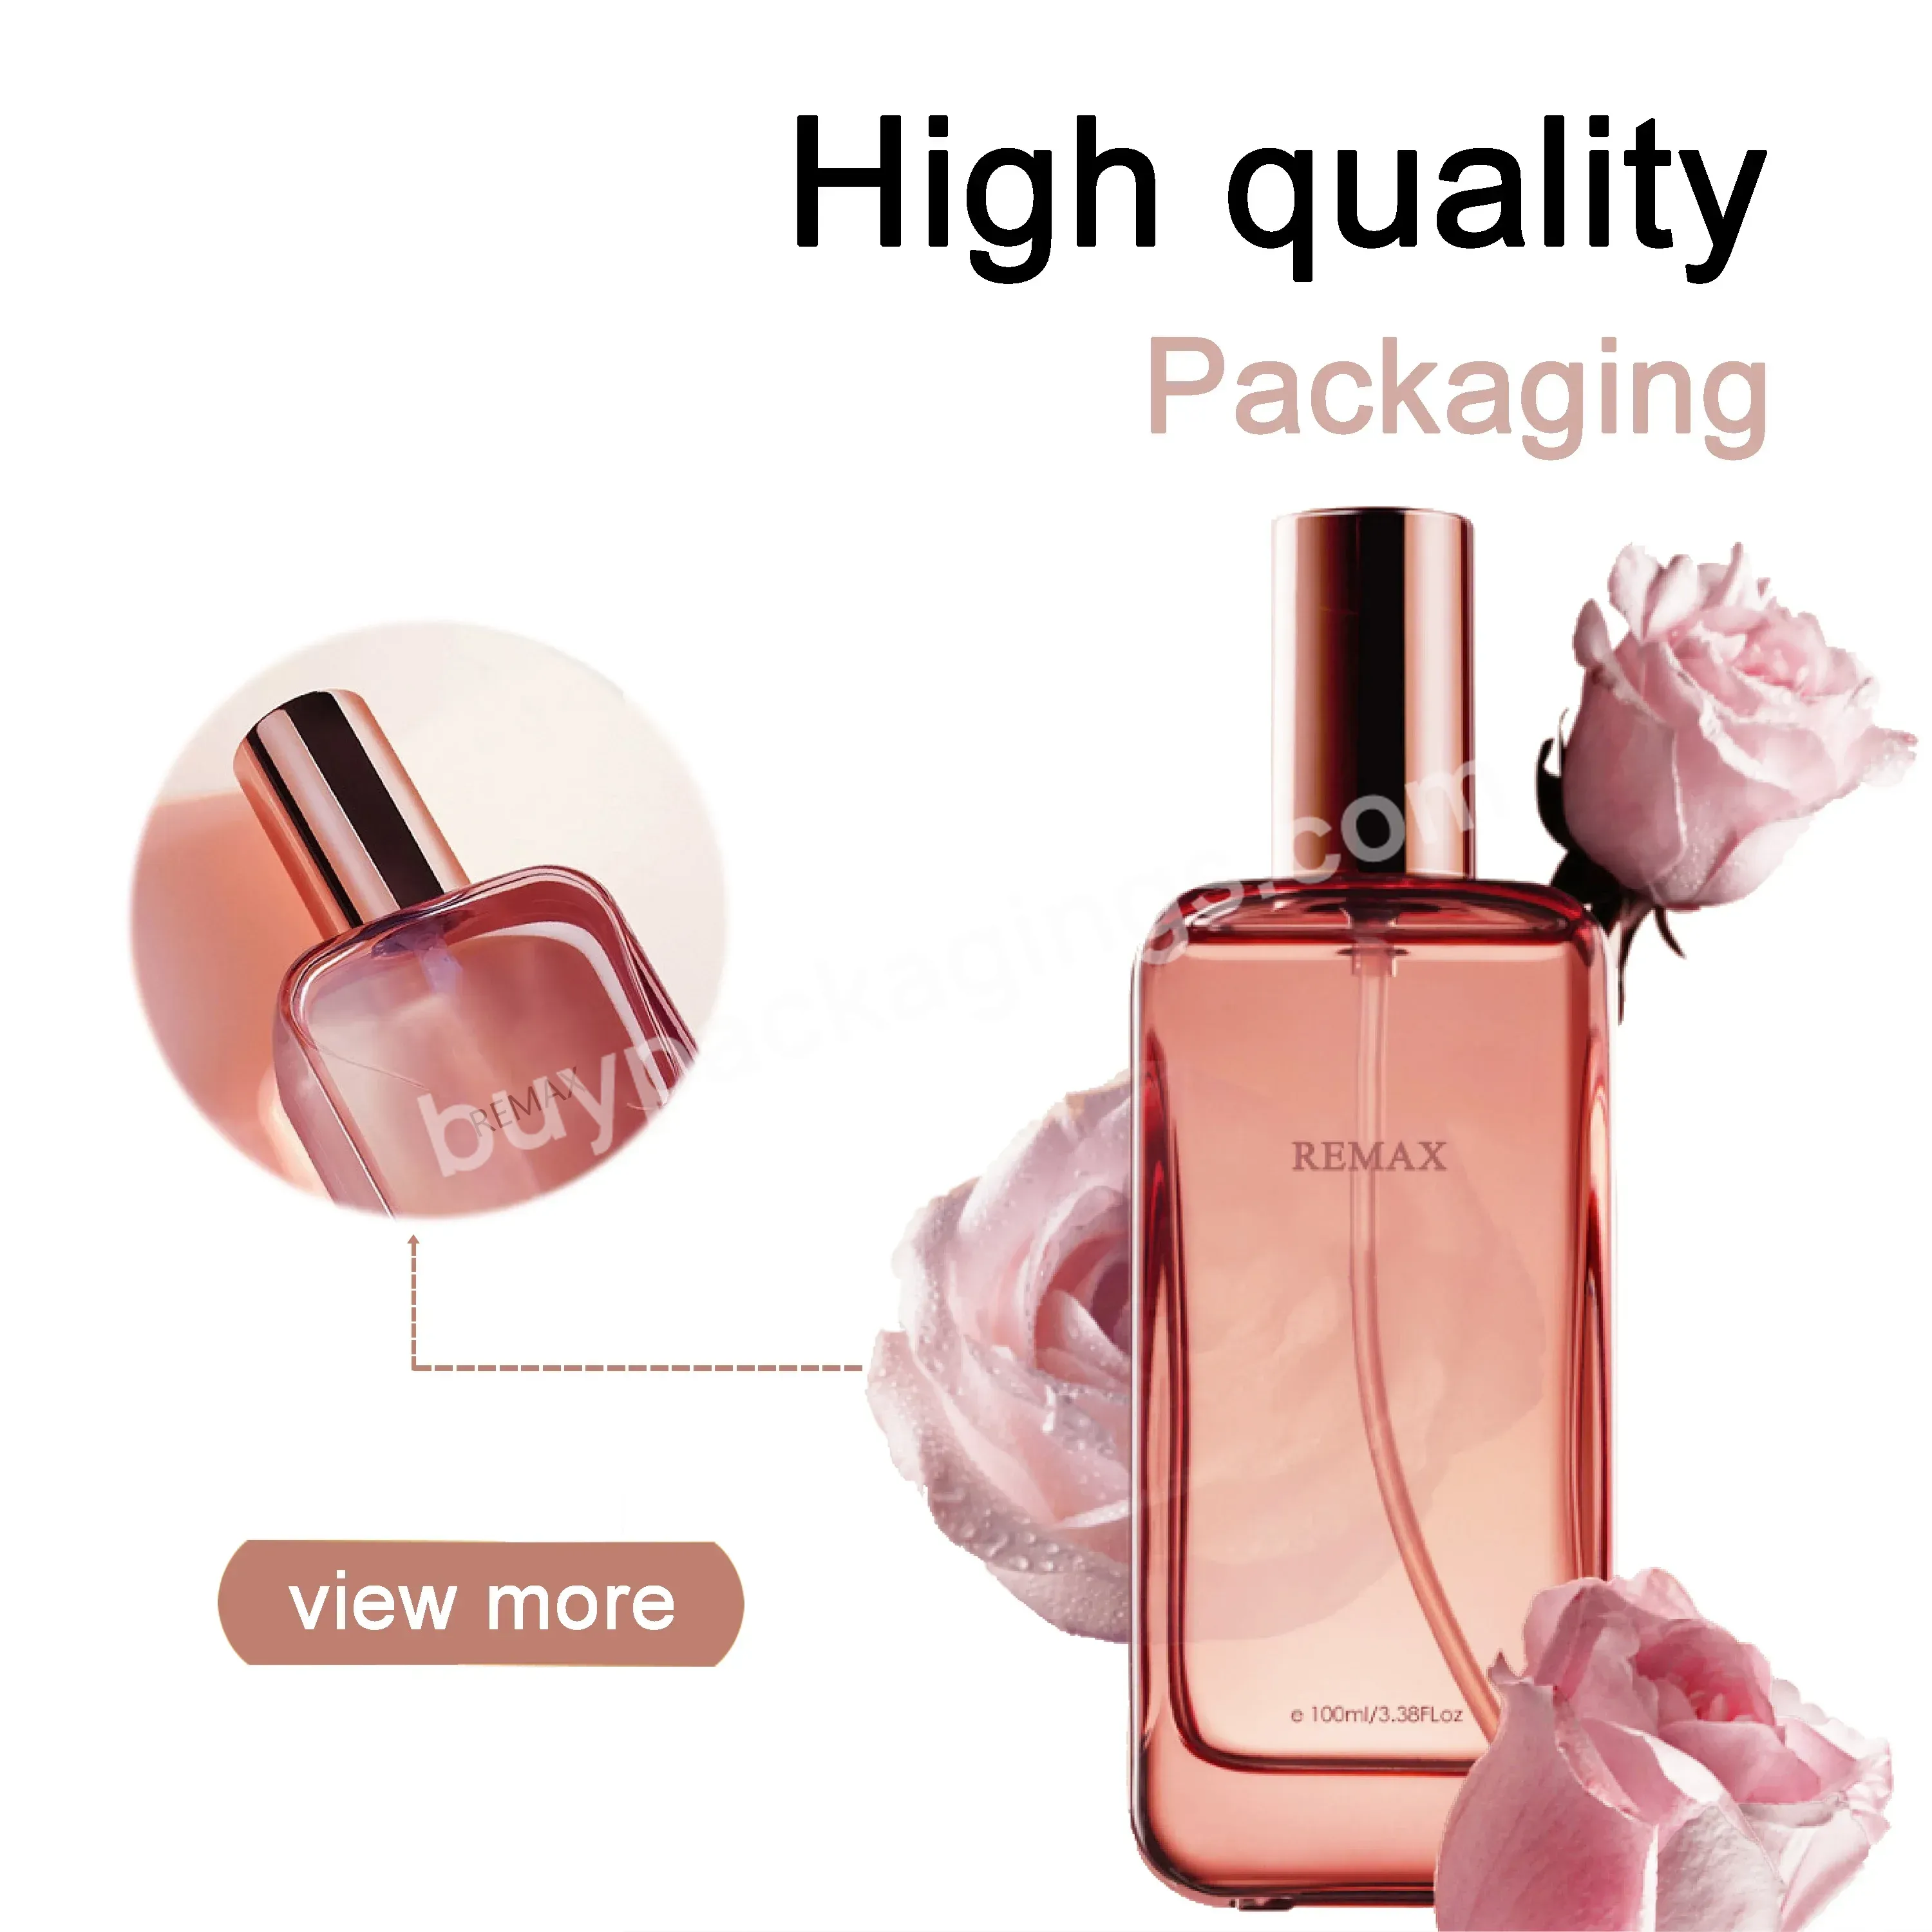 Refined High-quality 3.38oz/100ml Pink Hair Oil Lotion Glass Container With Pump Refillable Containers - Buy 100ml Pink Hair Elixir Bottle,Refined High-quality Packaging Bottle,Container With Pump.